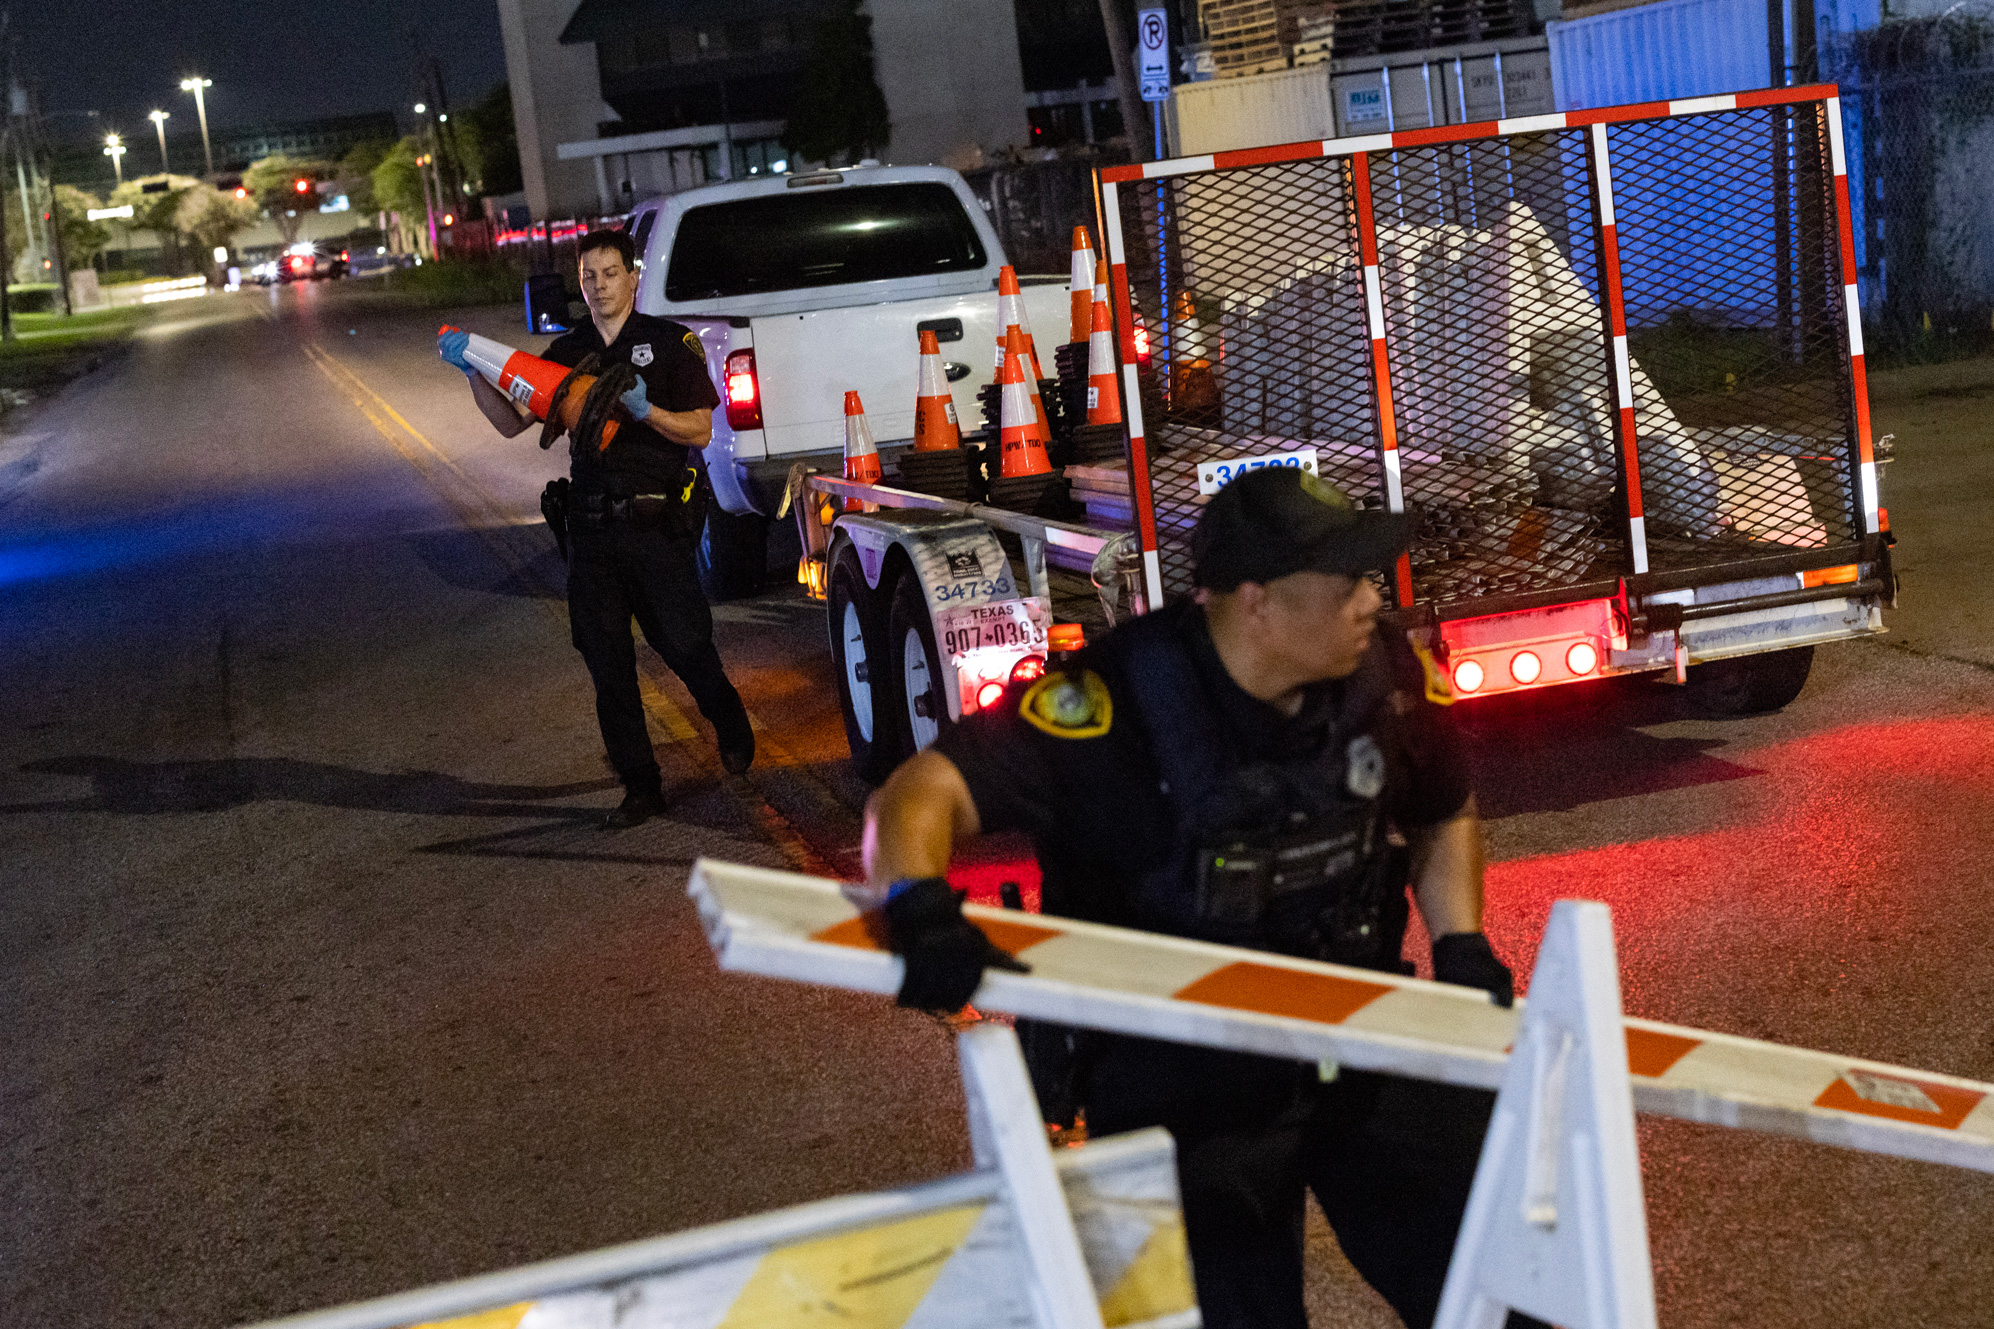 Police officers put together barricades to block roads at night 